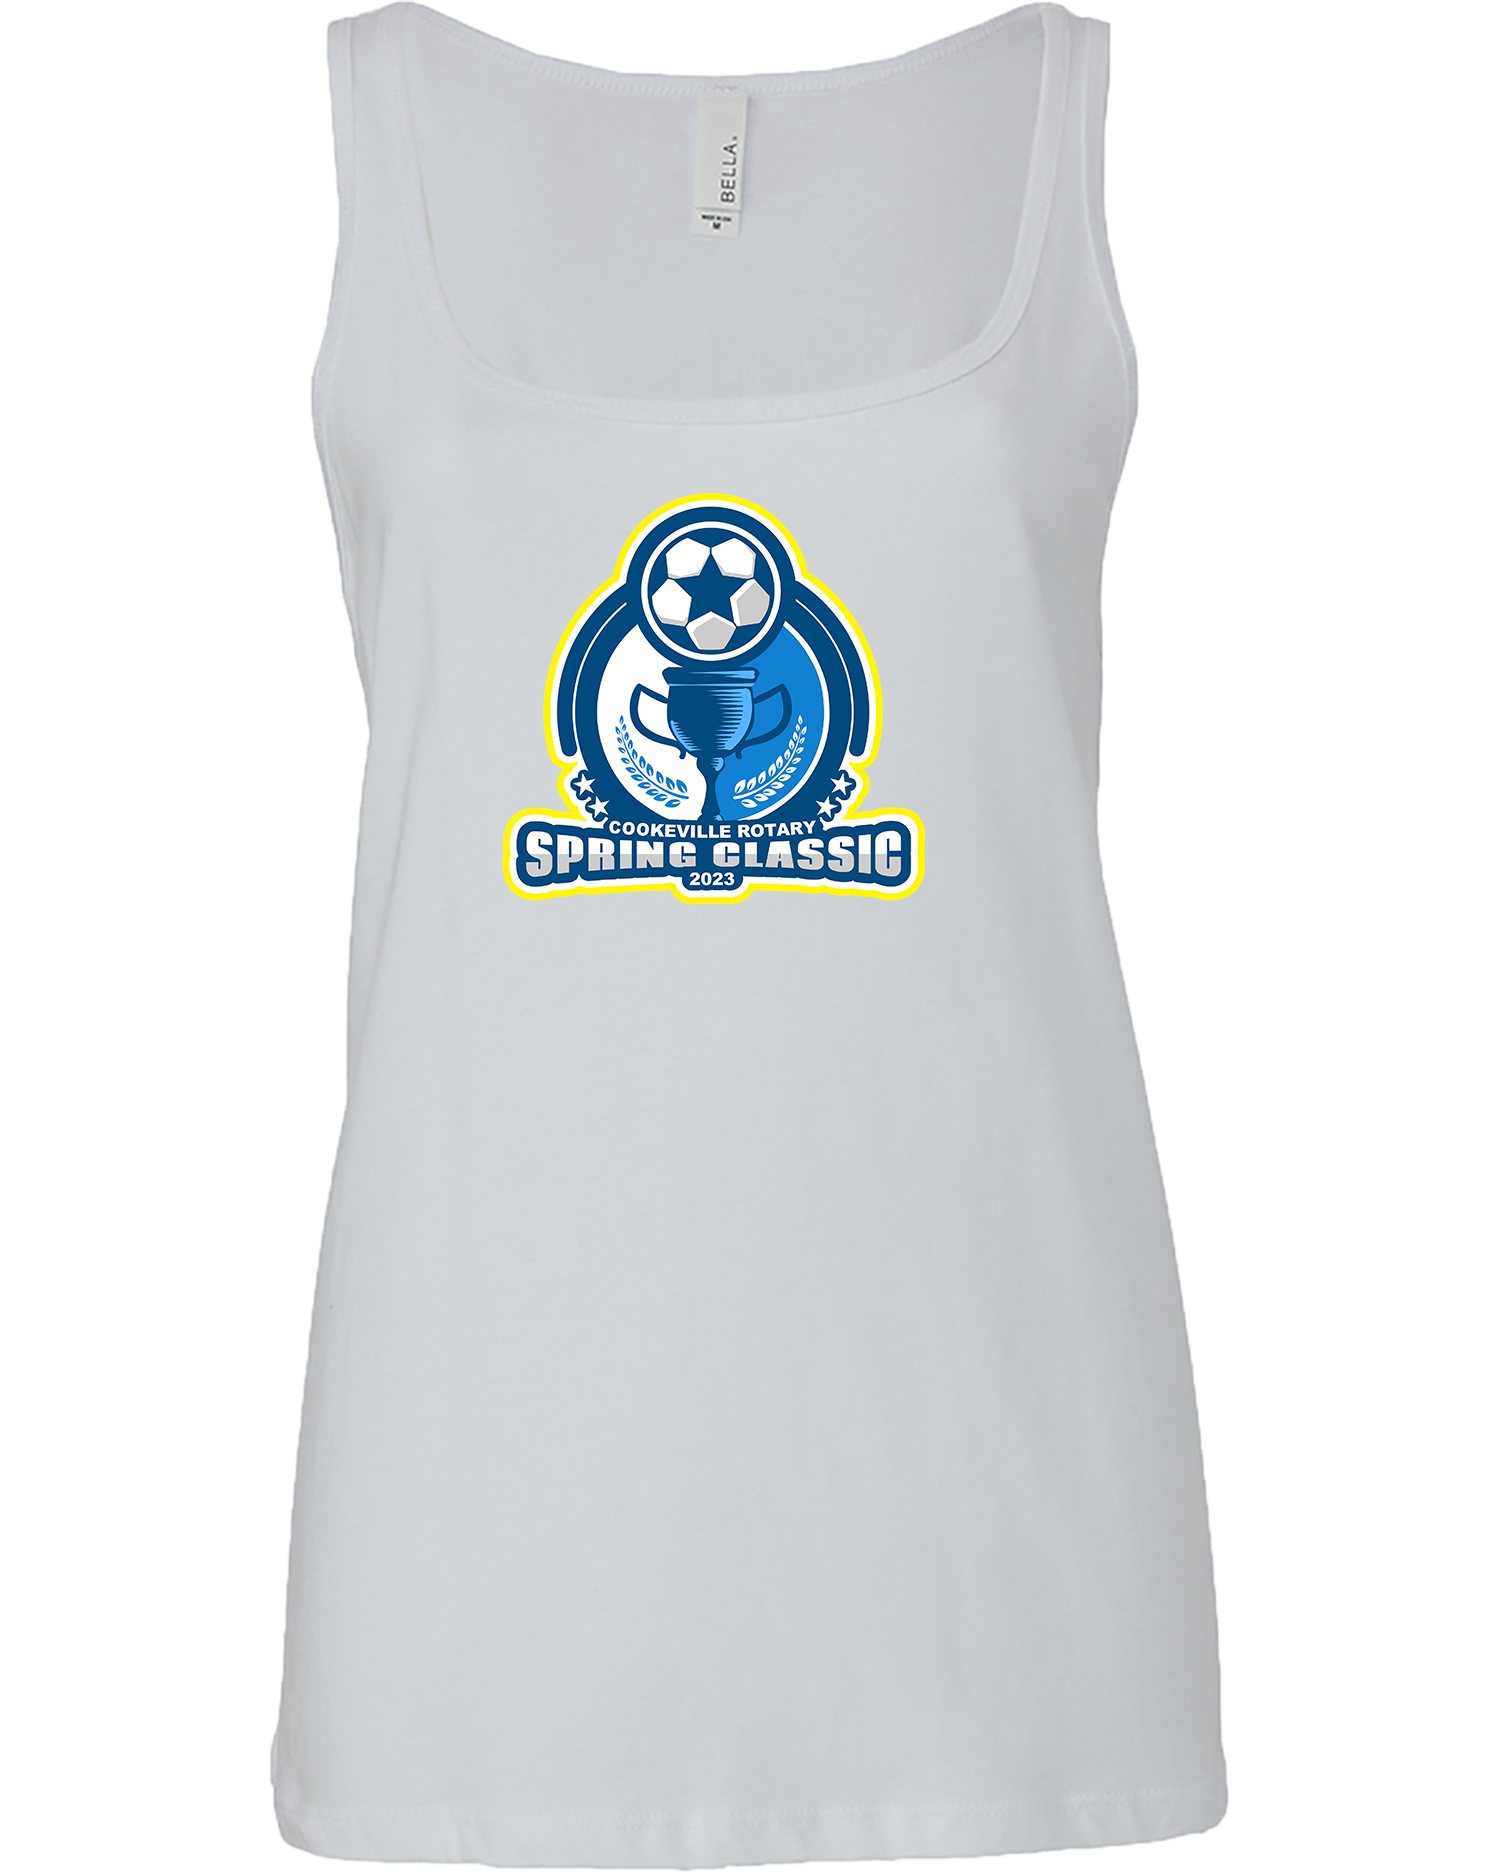 TANK TOP - 2023 Cookesville Rotary Soccer Classic